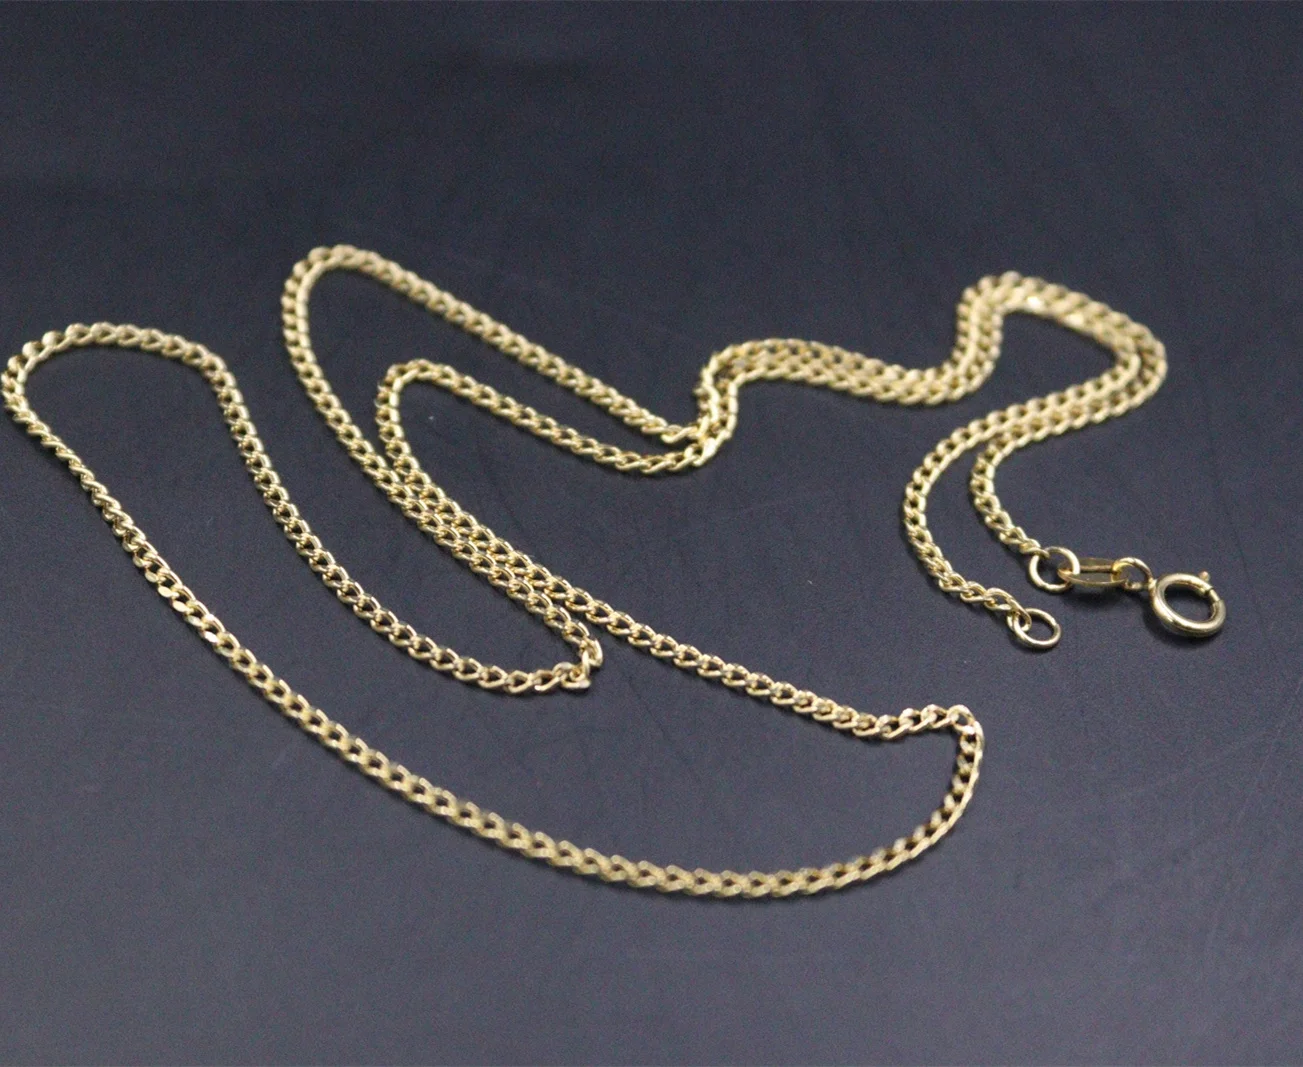 

Pure Au750 18K Yellow Gold Chain Women Curb Link Necklace 2.1-2.3g 20in L